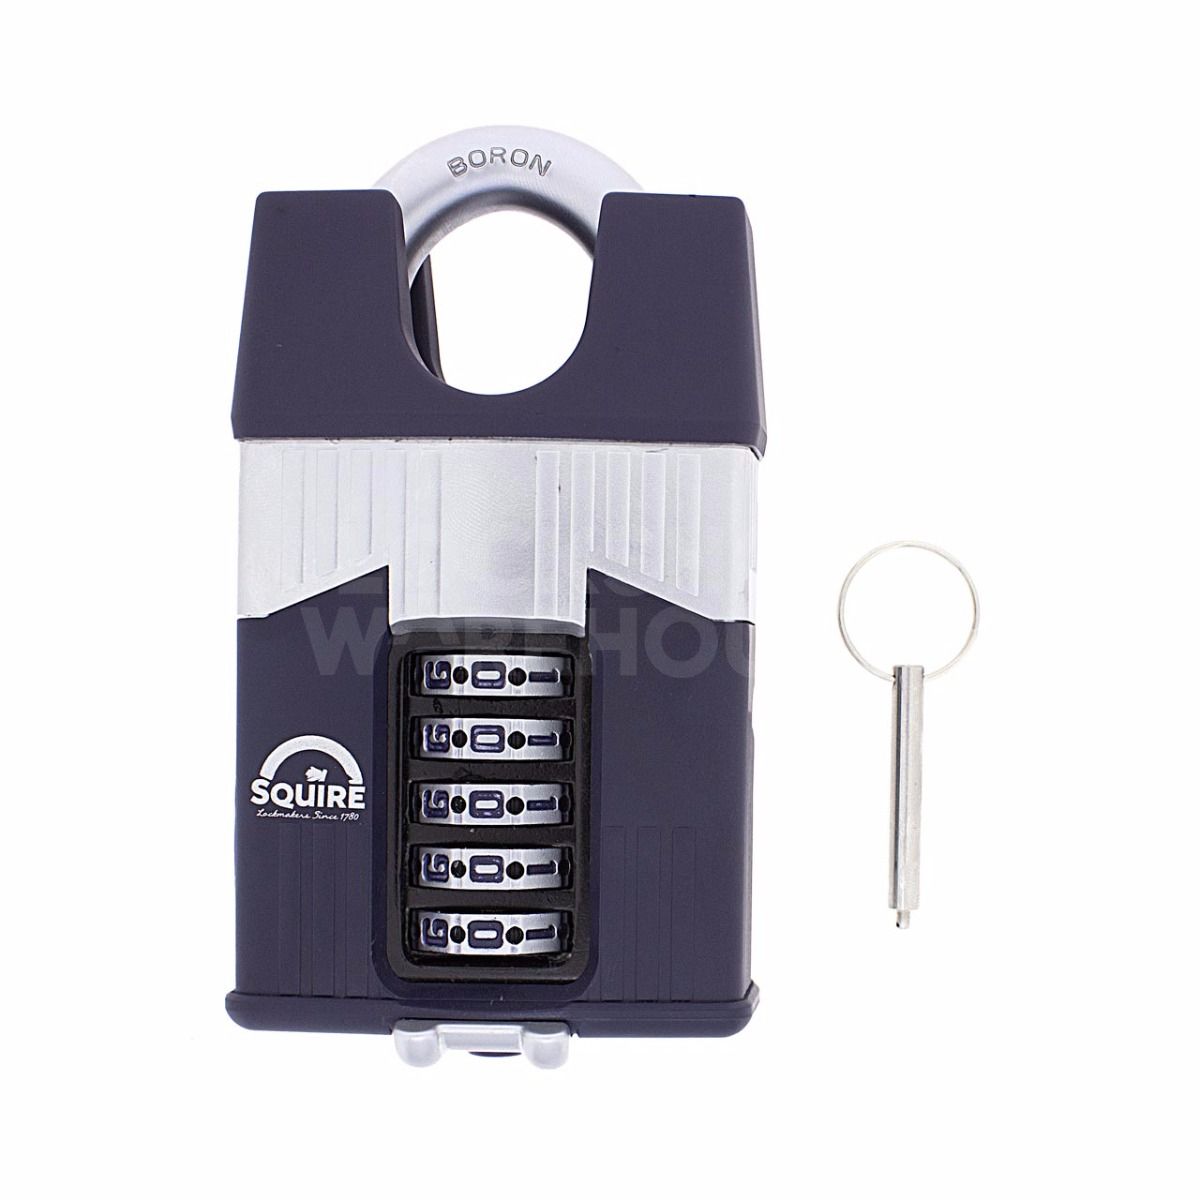 Dimensions Image: SQUIRE Warrior WAR65 Closed Shackle Combination Padlock